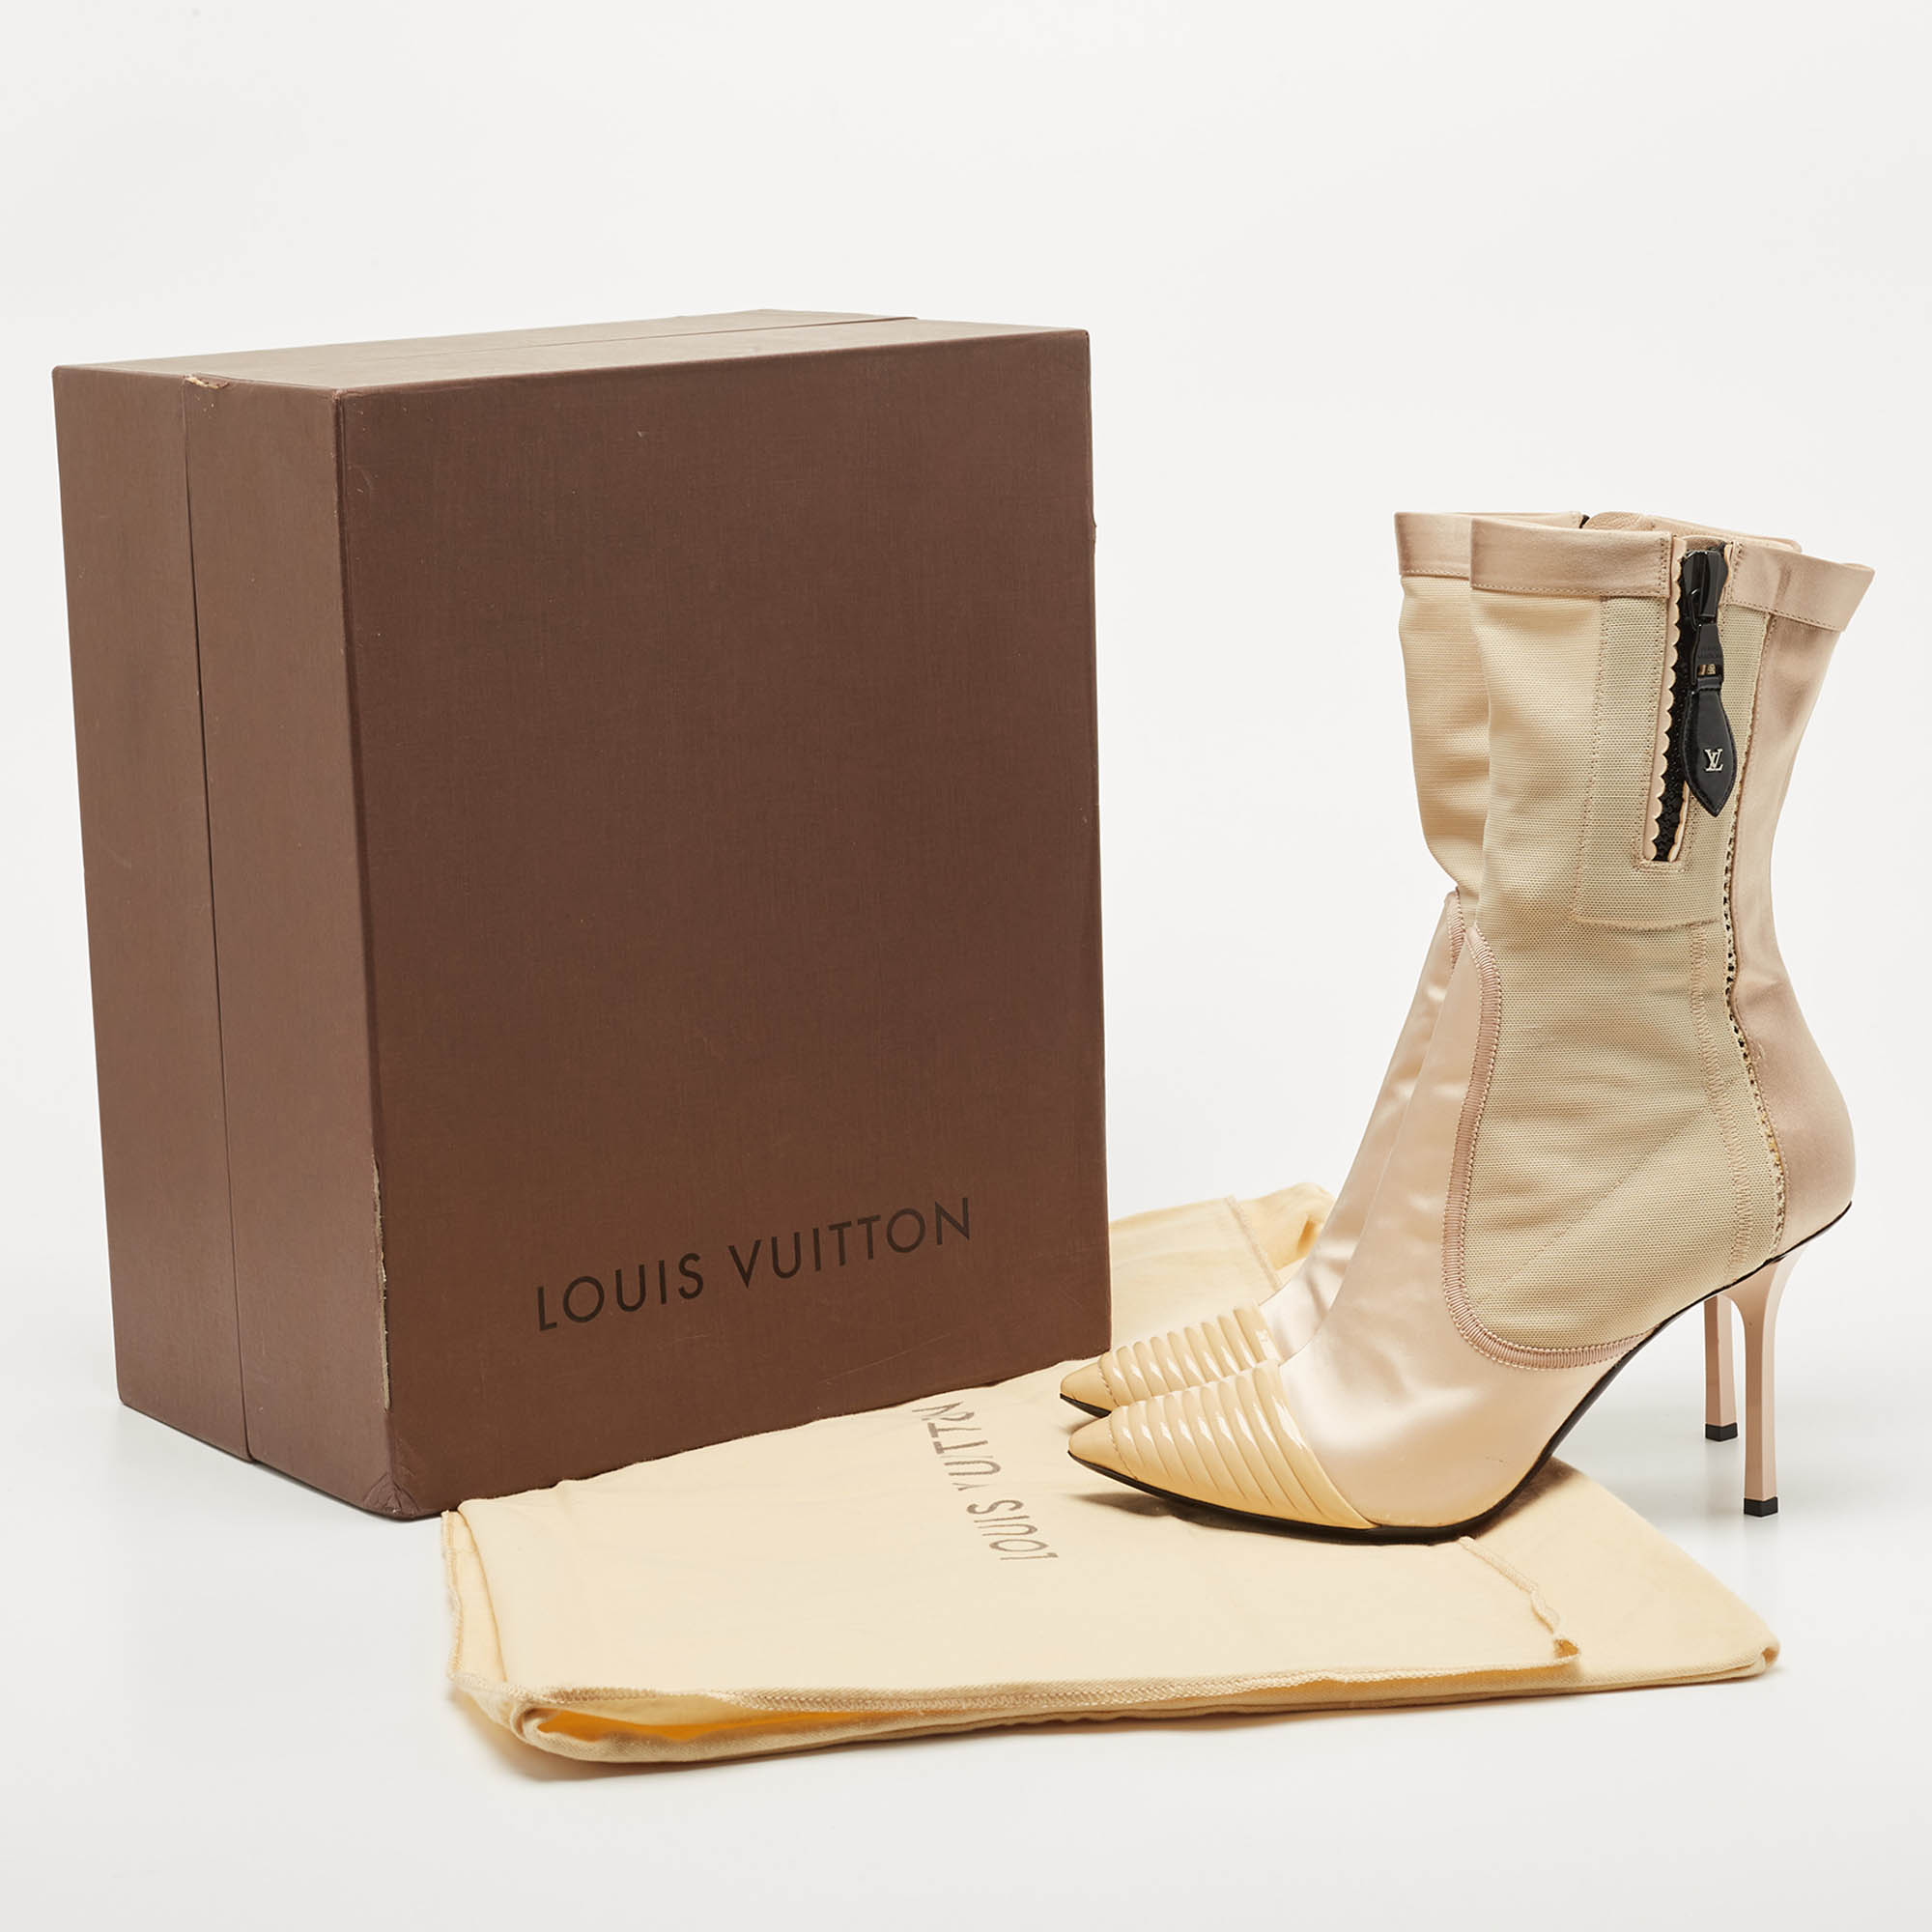 Louis Vuitton Beige Satin And Stretch Mesh Pointed Toe Ankle Booties Size 39